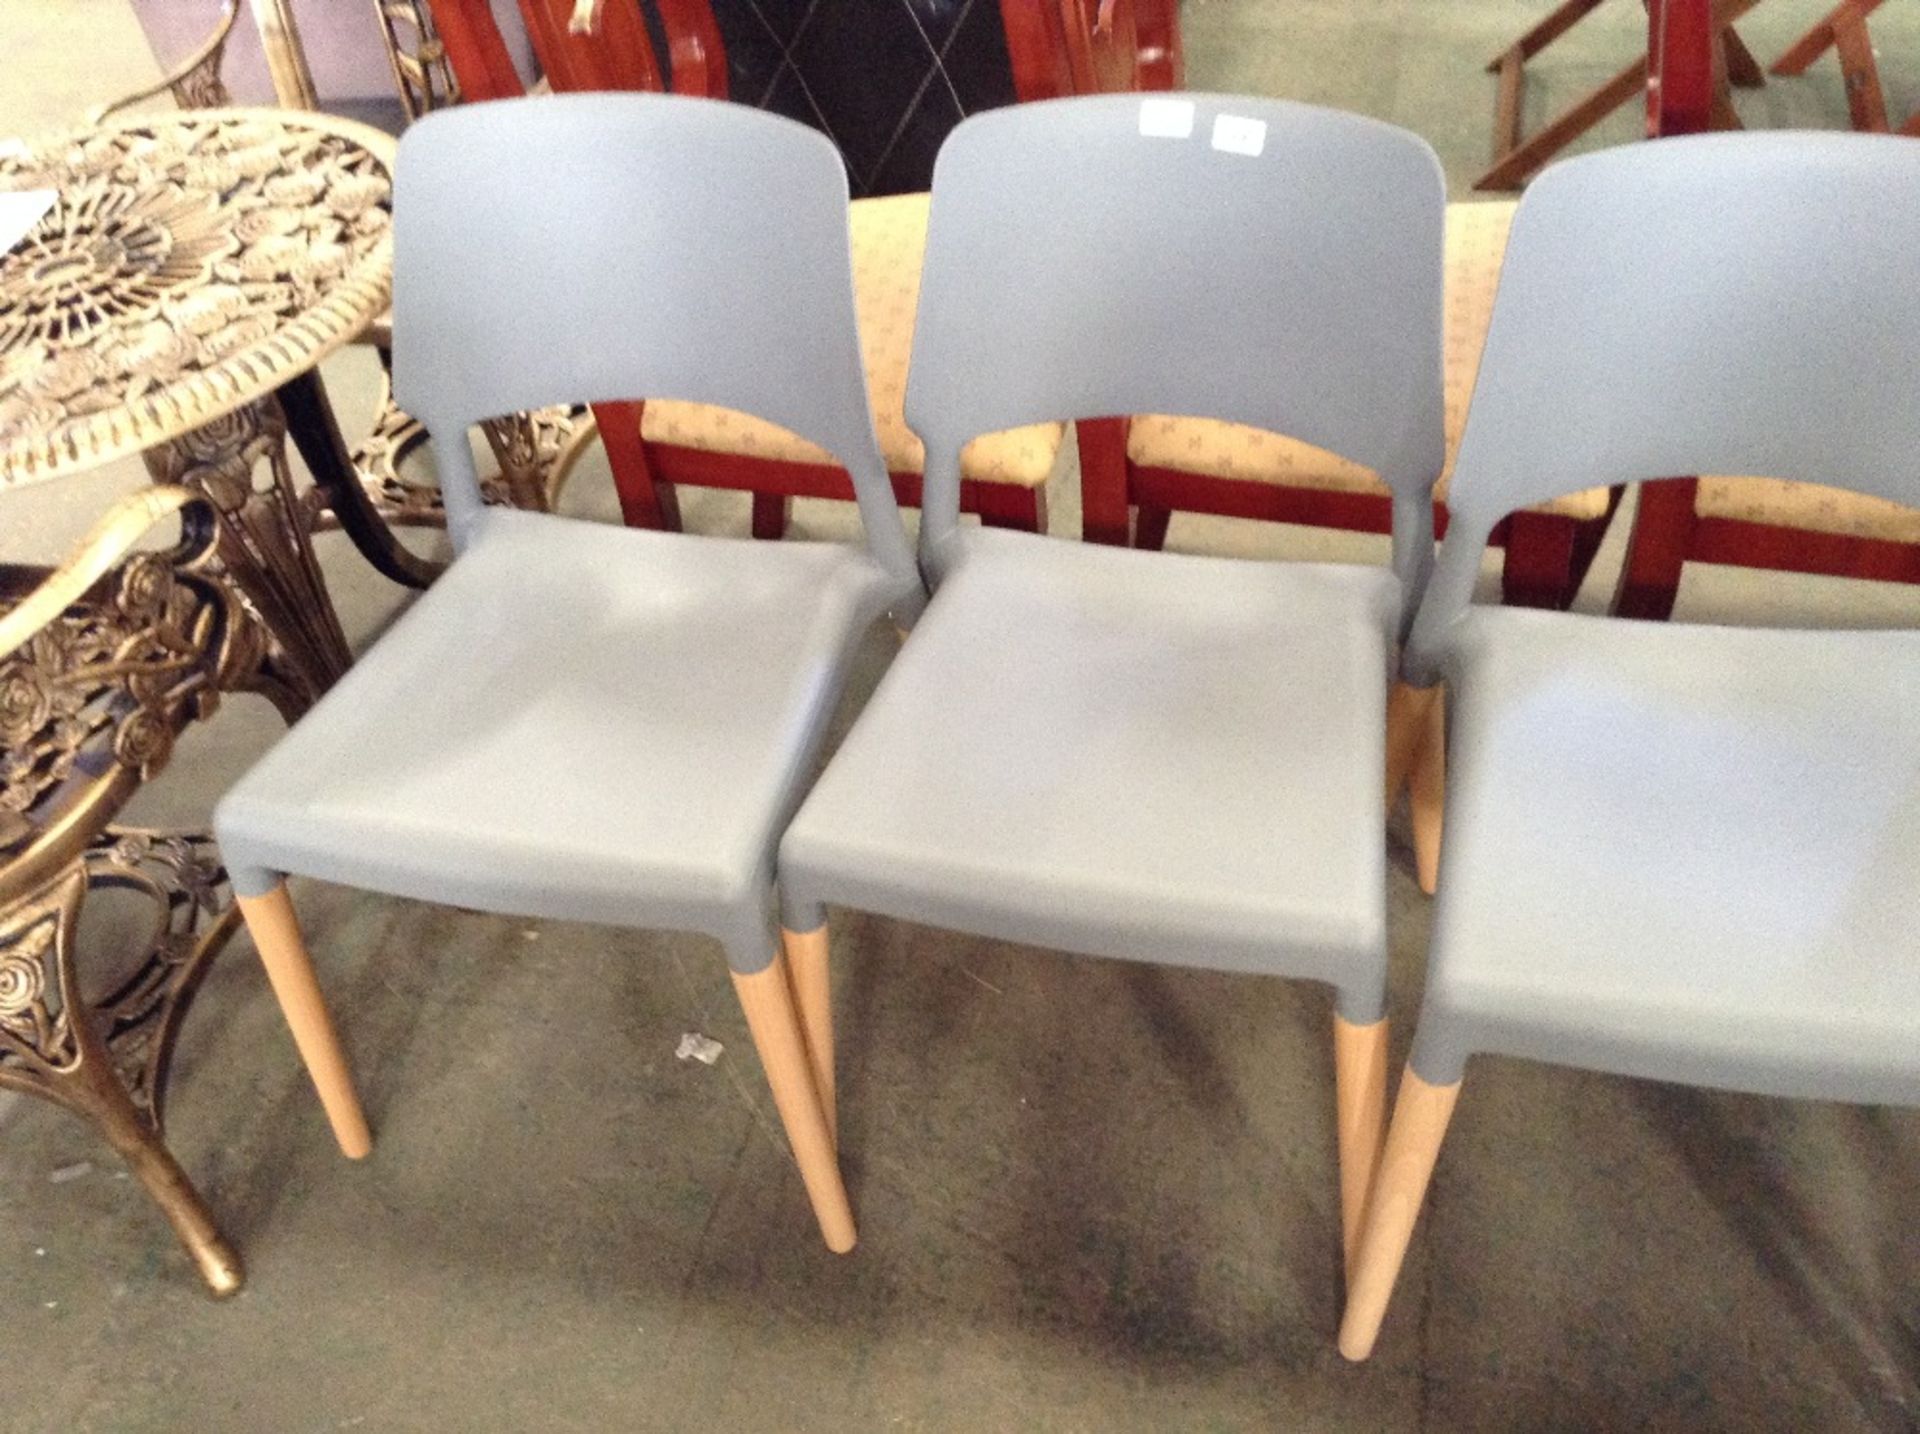 17 Stories Epping Dining Chair X 2(LPDL1454 - 12234/1)